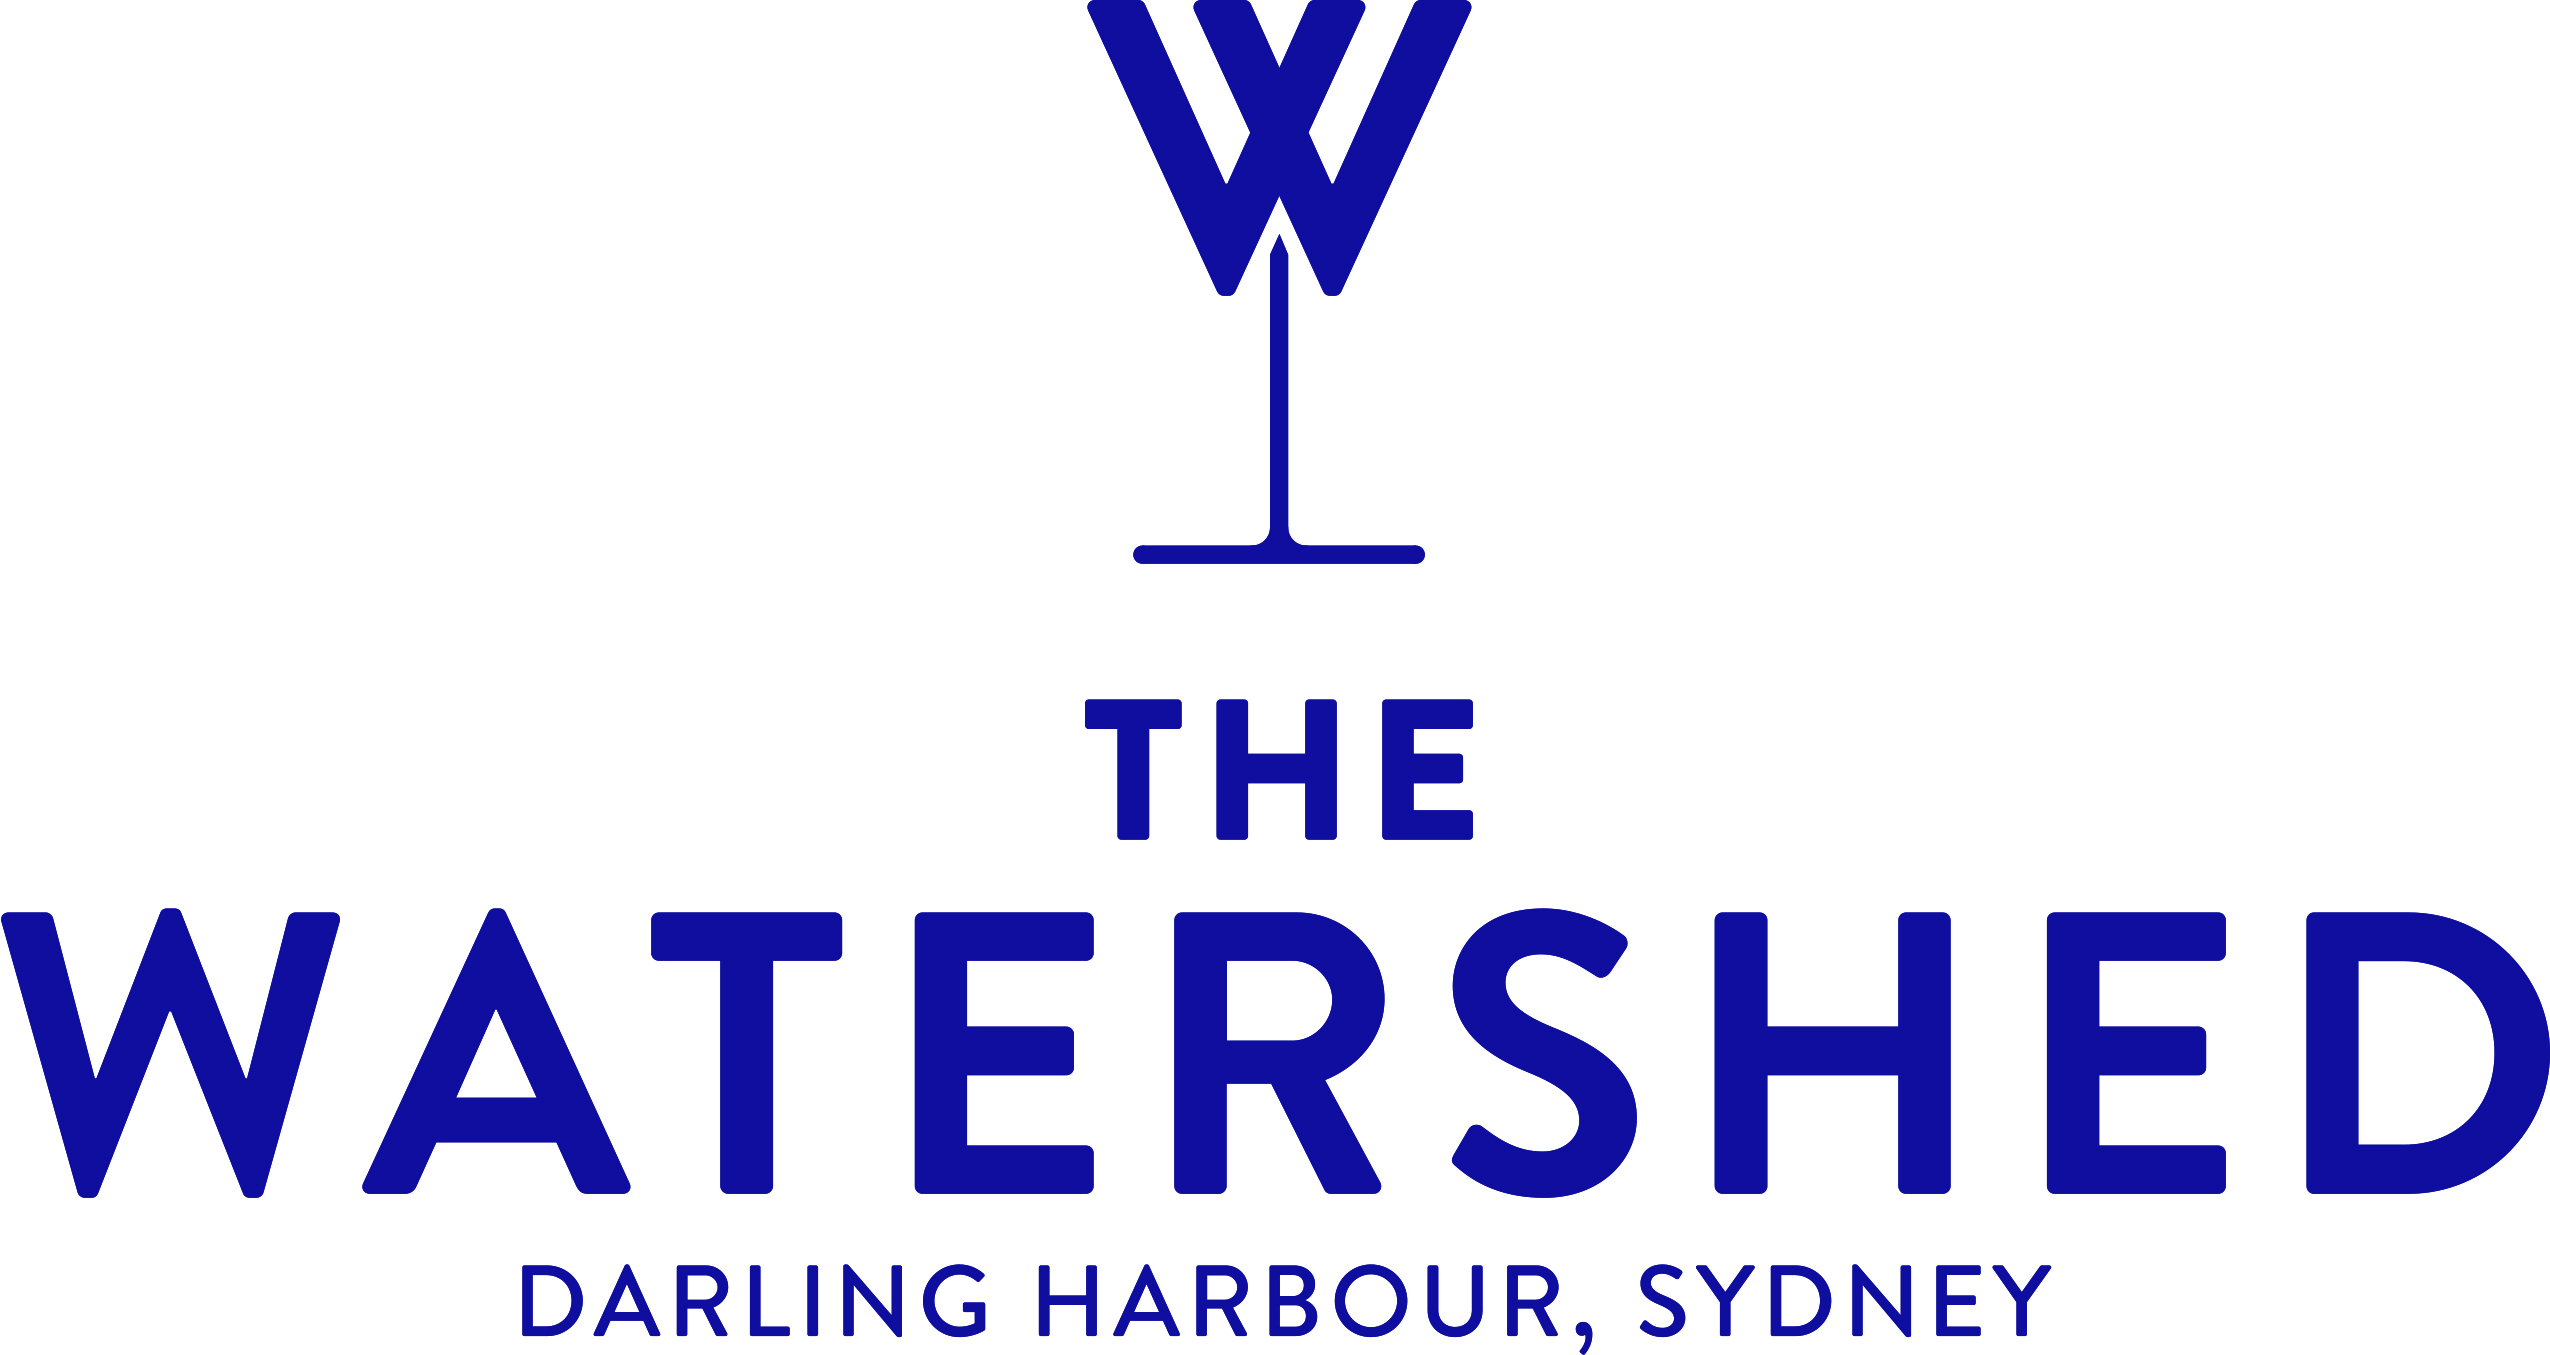 Watershed Hotel